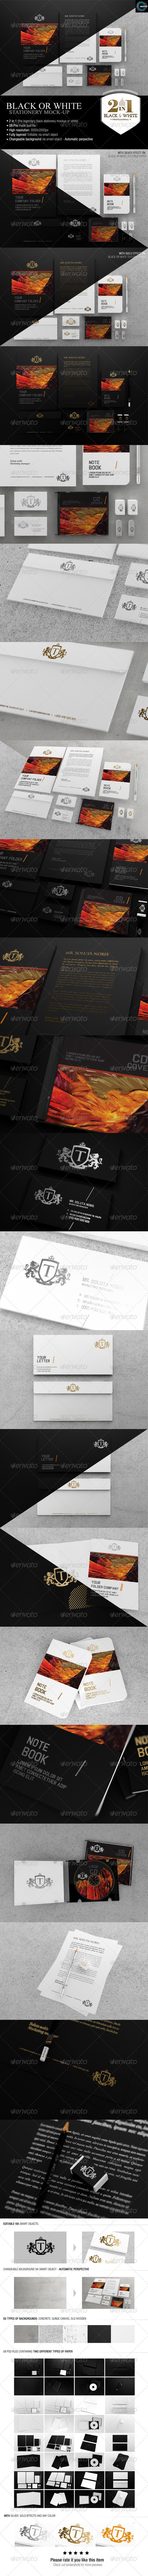 Black 20or 20white 20stationery 20mockup 20preview